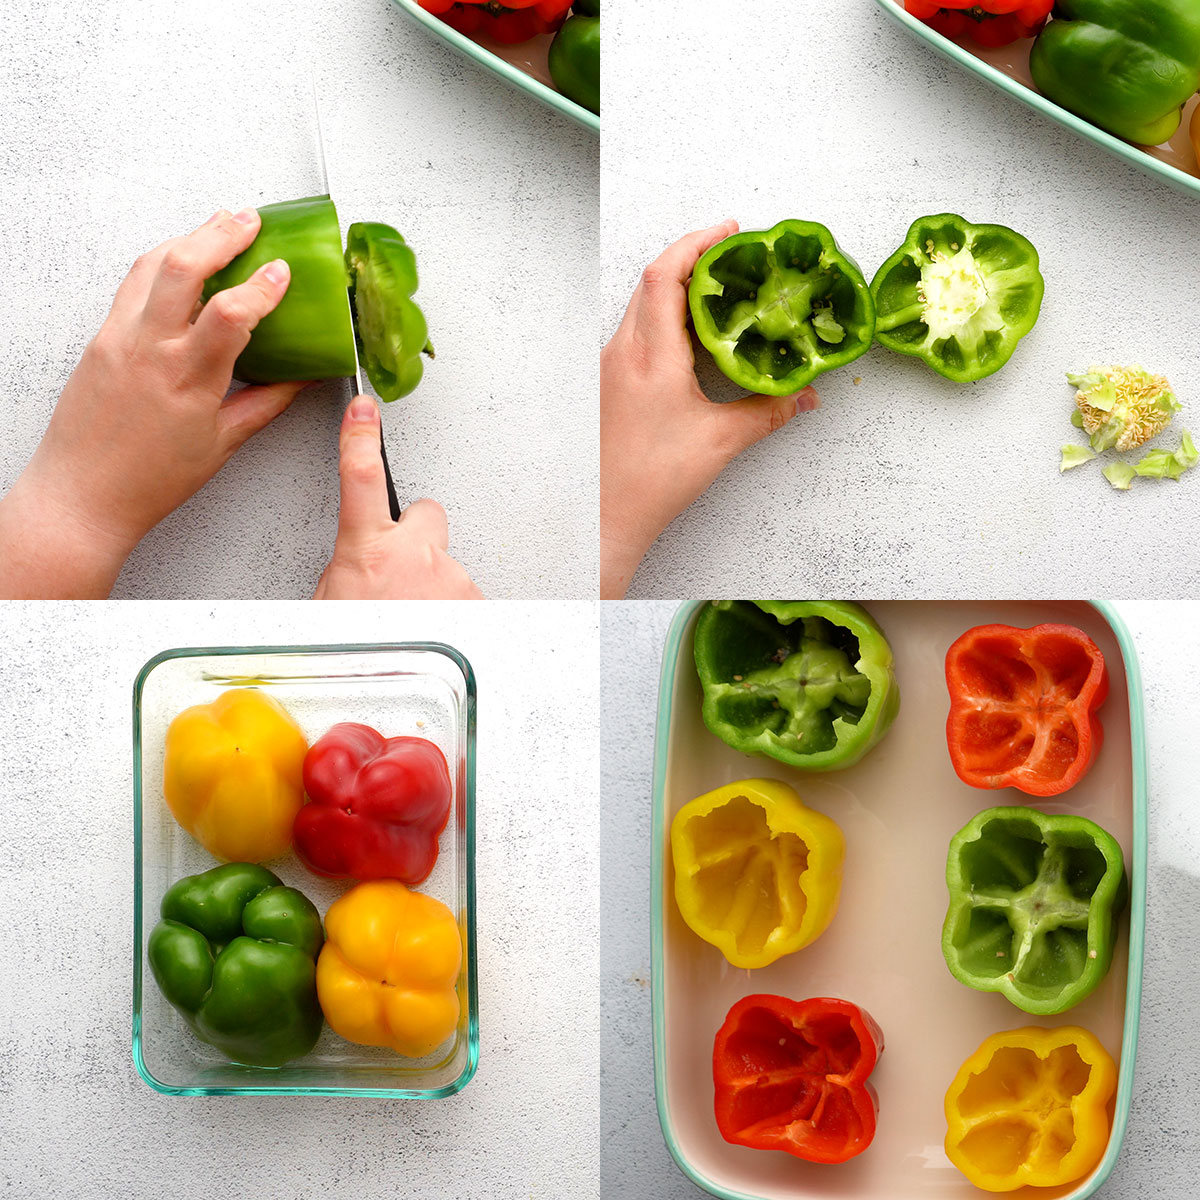 Step by step instruction of cutting tops off of bell peppers, scooping out seeds, pre-cooking in dish, and placing in casserole dish to fill and bake.